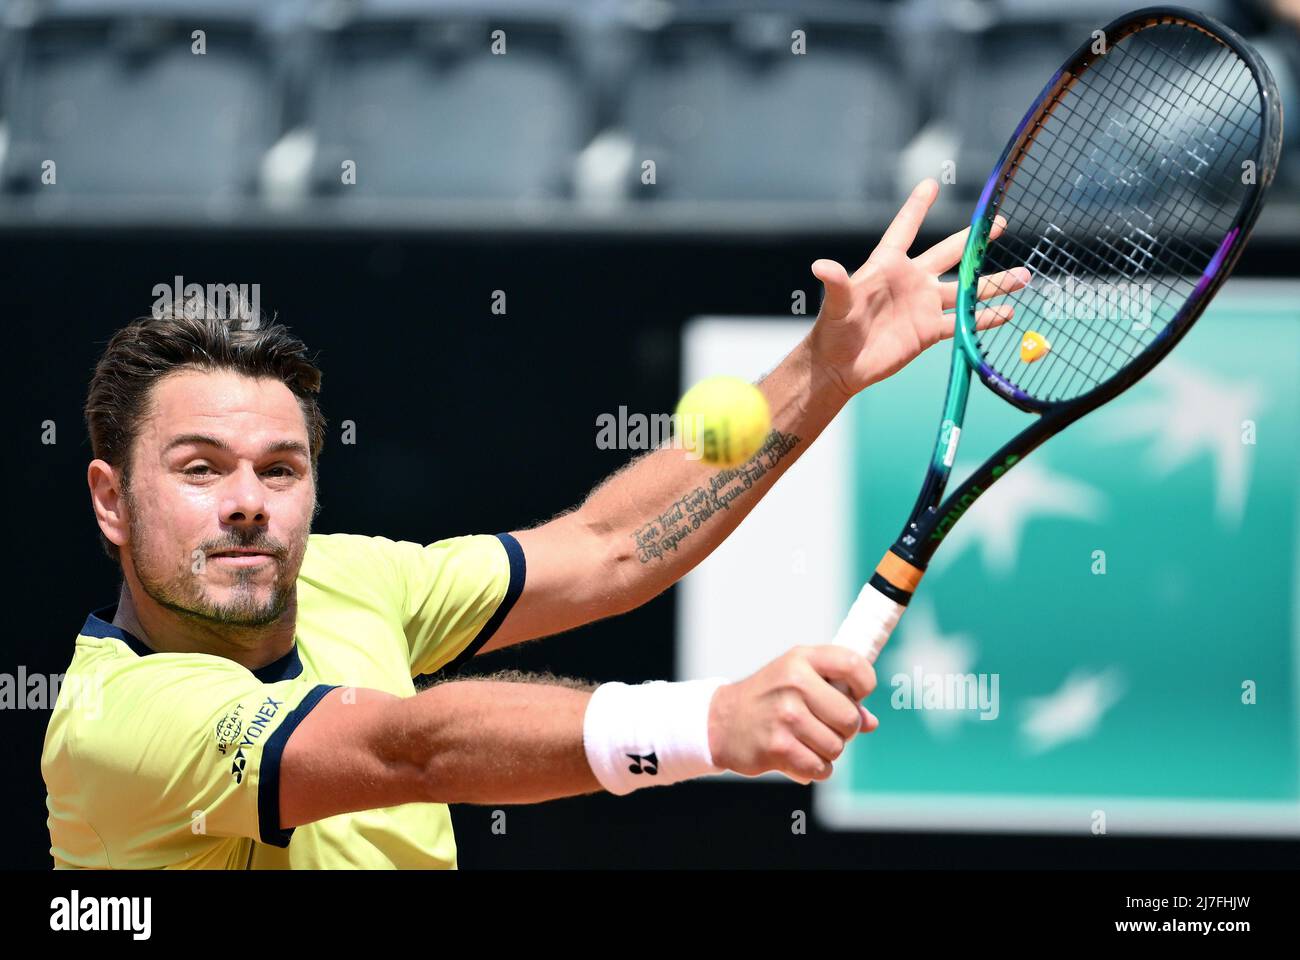 May 9, 2022, ROME Stan Wawrinka of Switzerland in action against Reilly Opelka of the US during their mens singles first round match at the Italian Open tennis tournament in Rome, Italy,